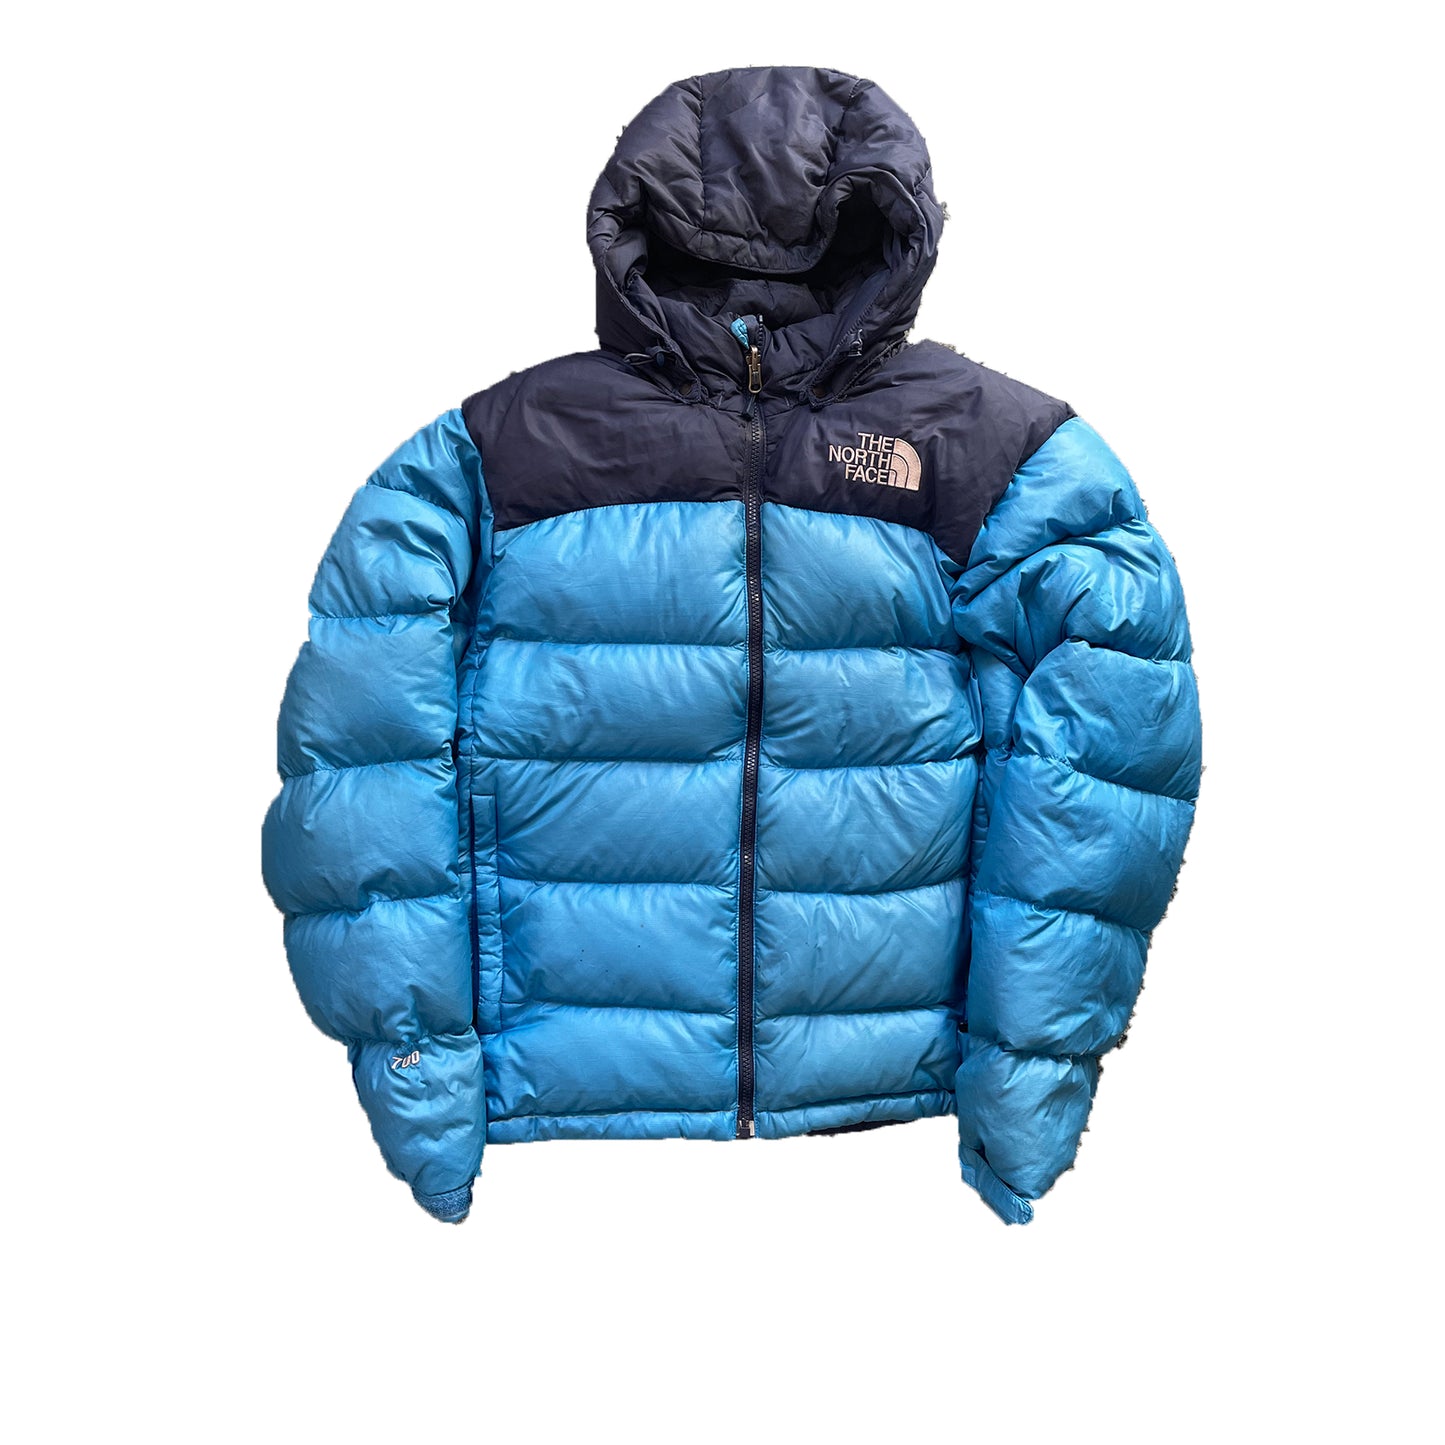 The North Face Nuptse 700 Puffer Jacket - Blue/Blue